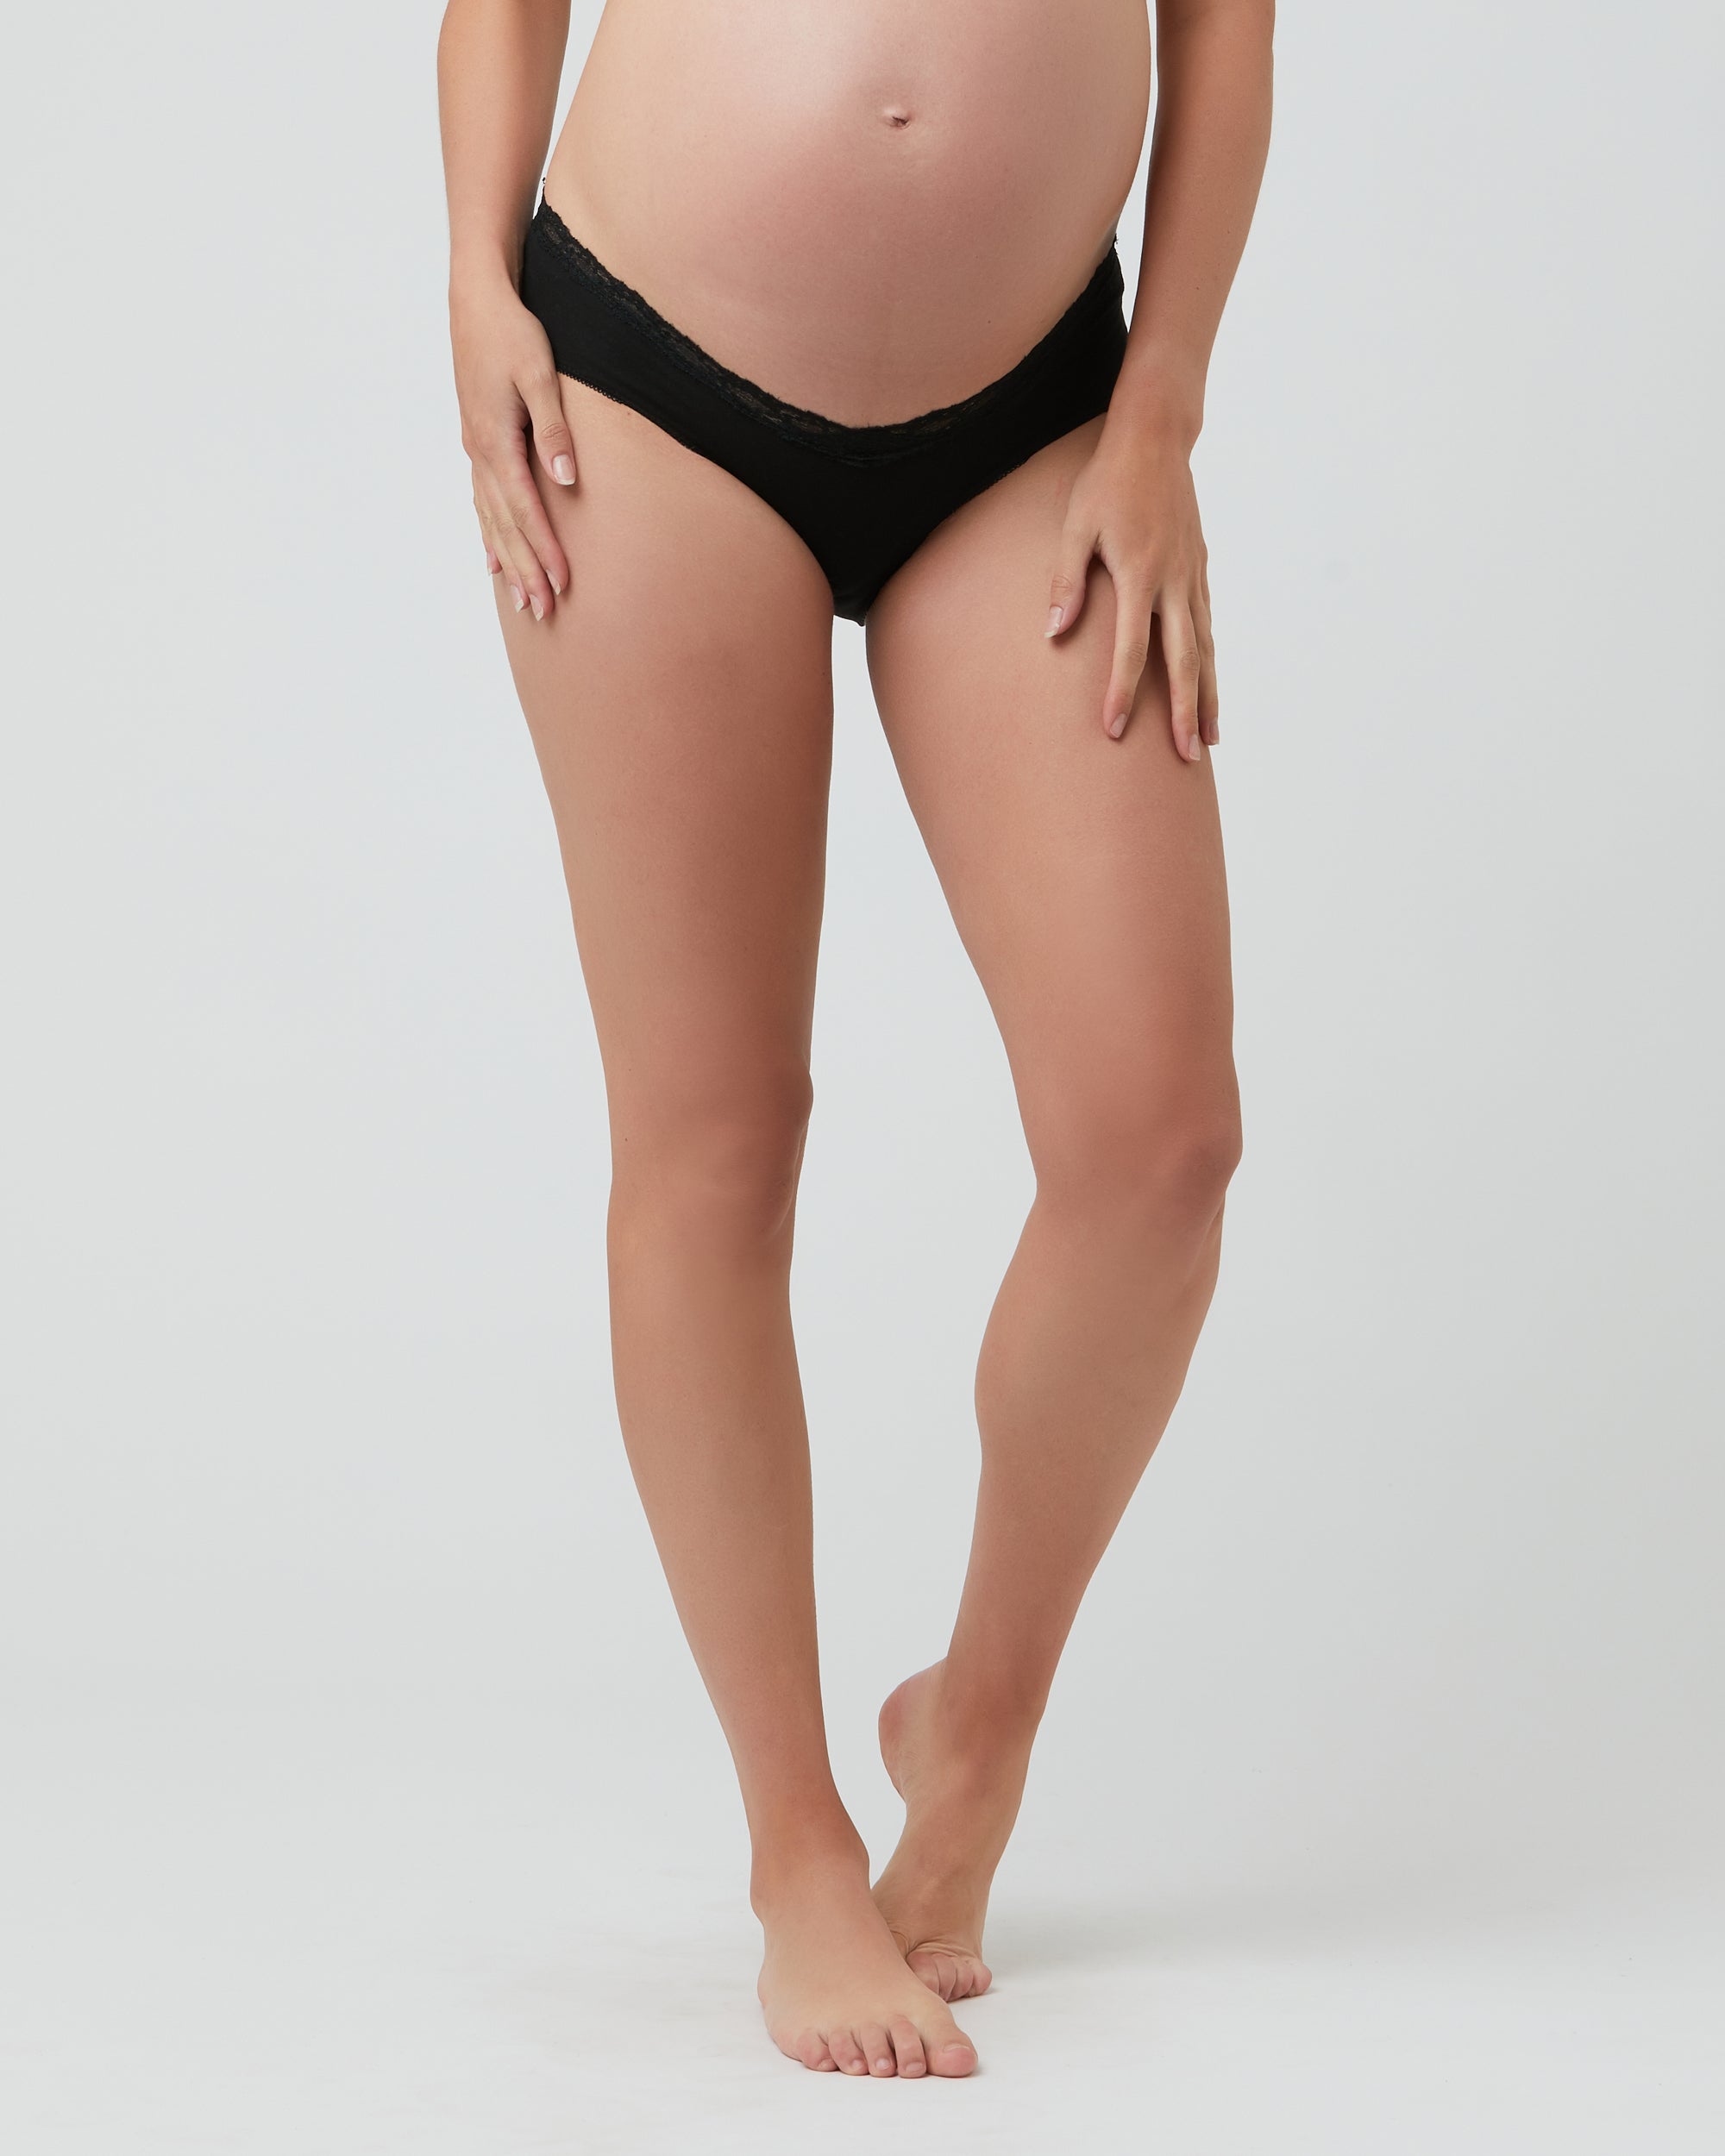 Where to Buy Cute Maternity Lingerie